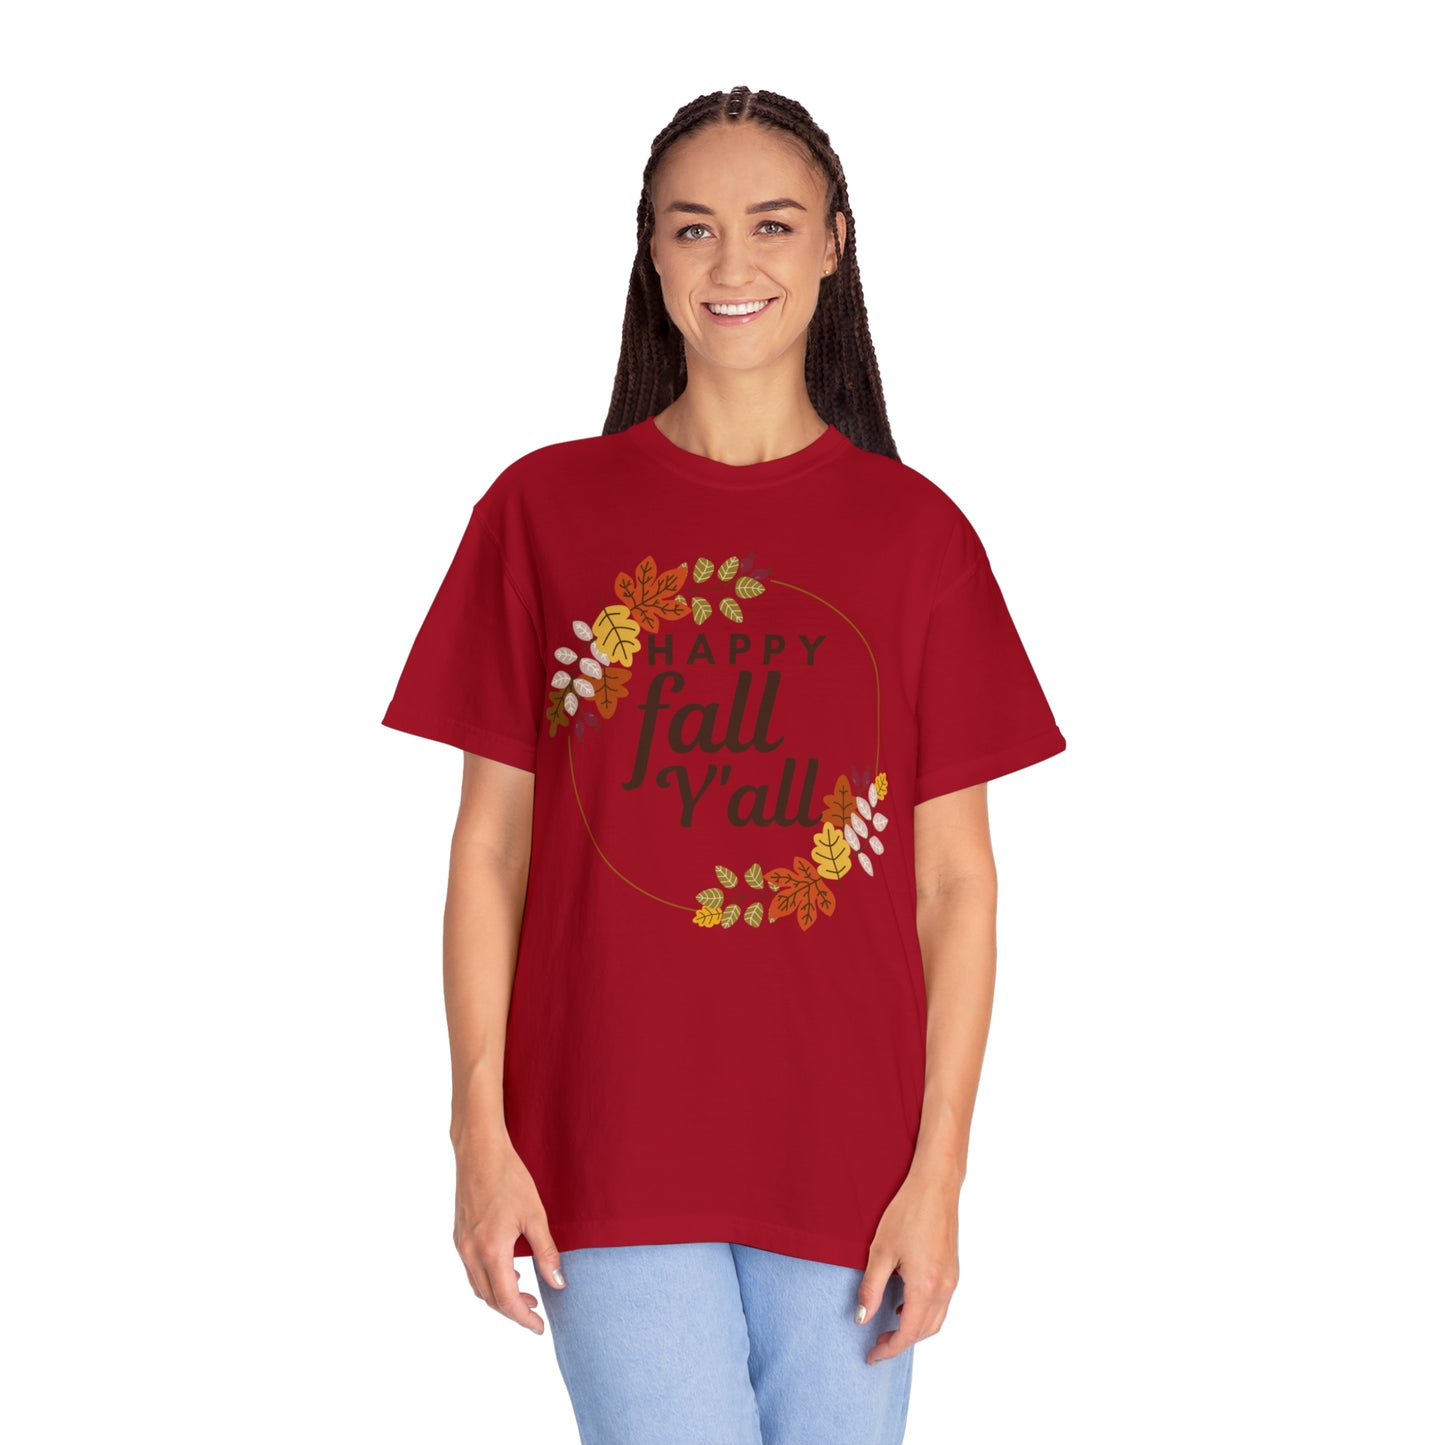 Happy Fall Y'all Gift for Fall, Funny Fall Shirts Gift, Autumn Tee, Fall Tshirt